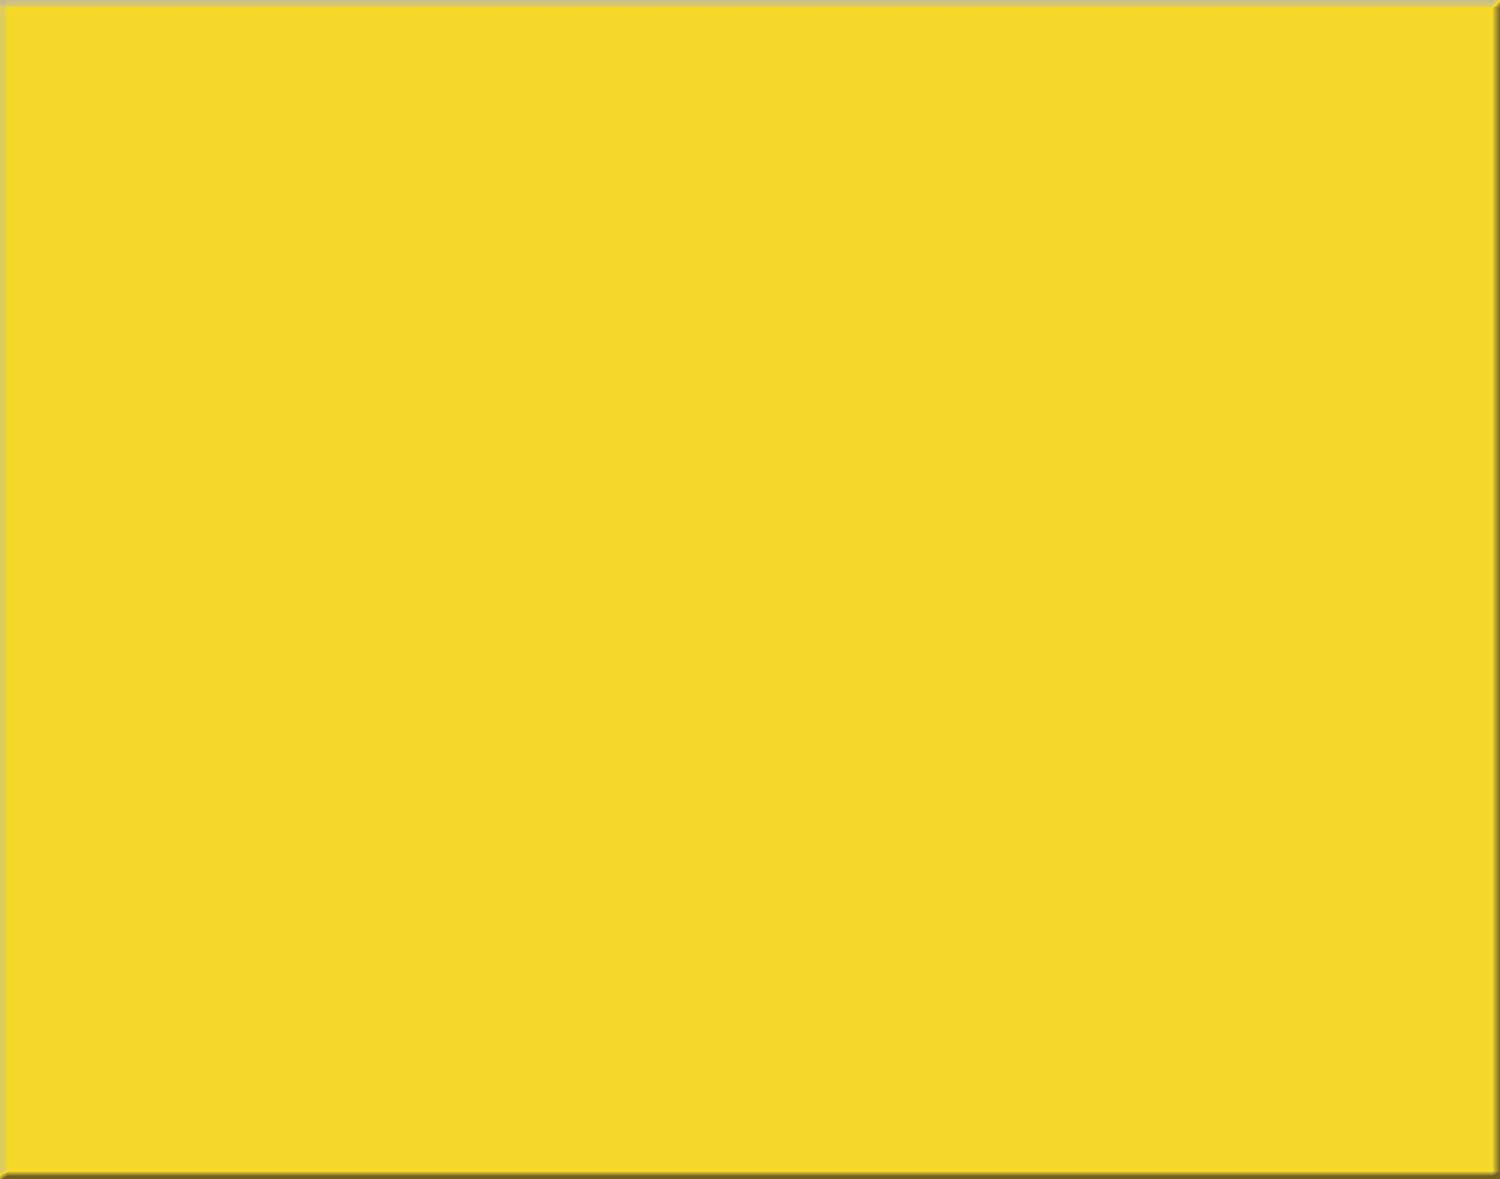 Poster Board/Yellow (PAC 5472)